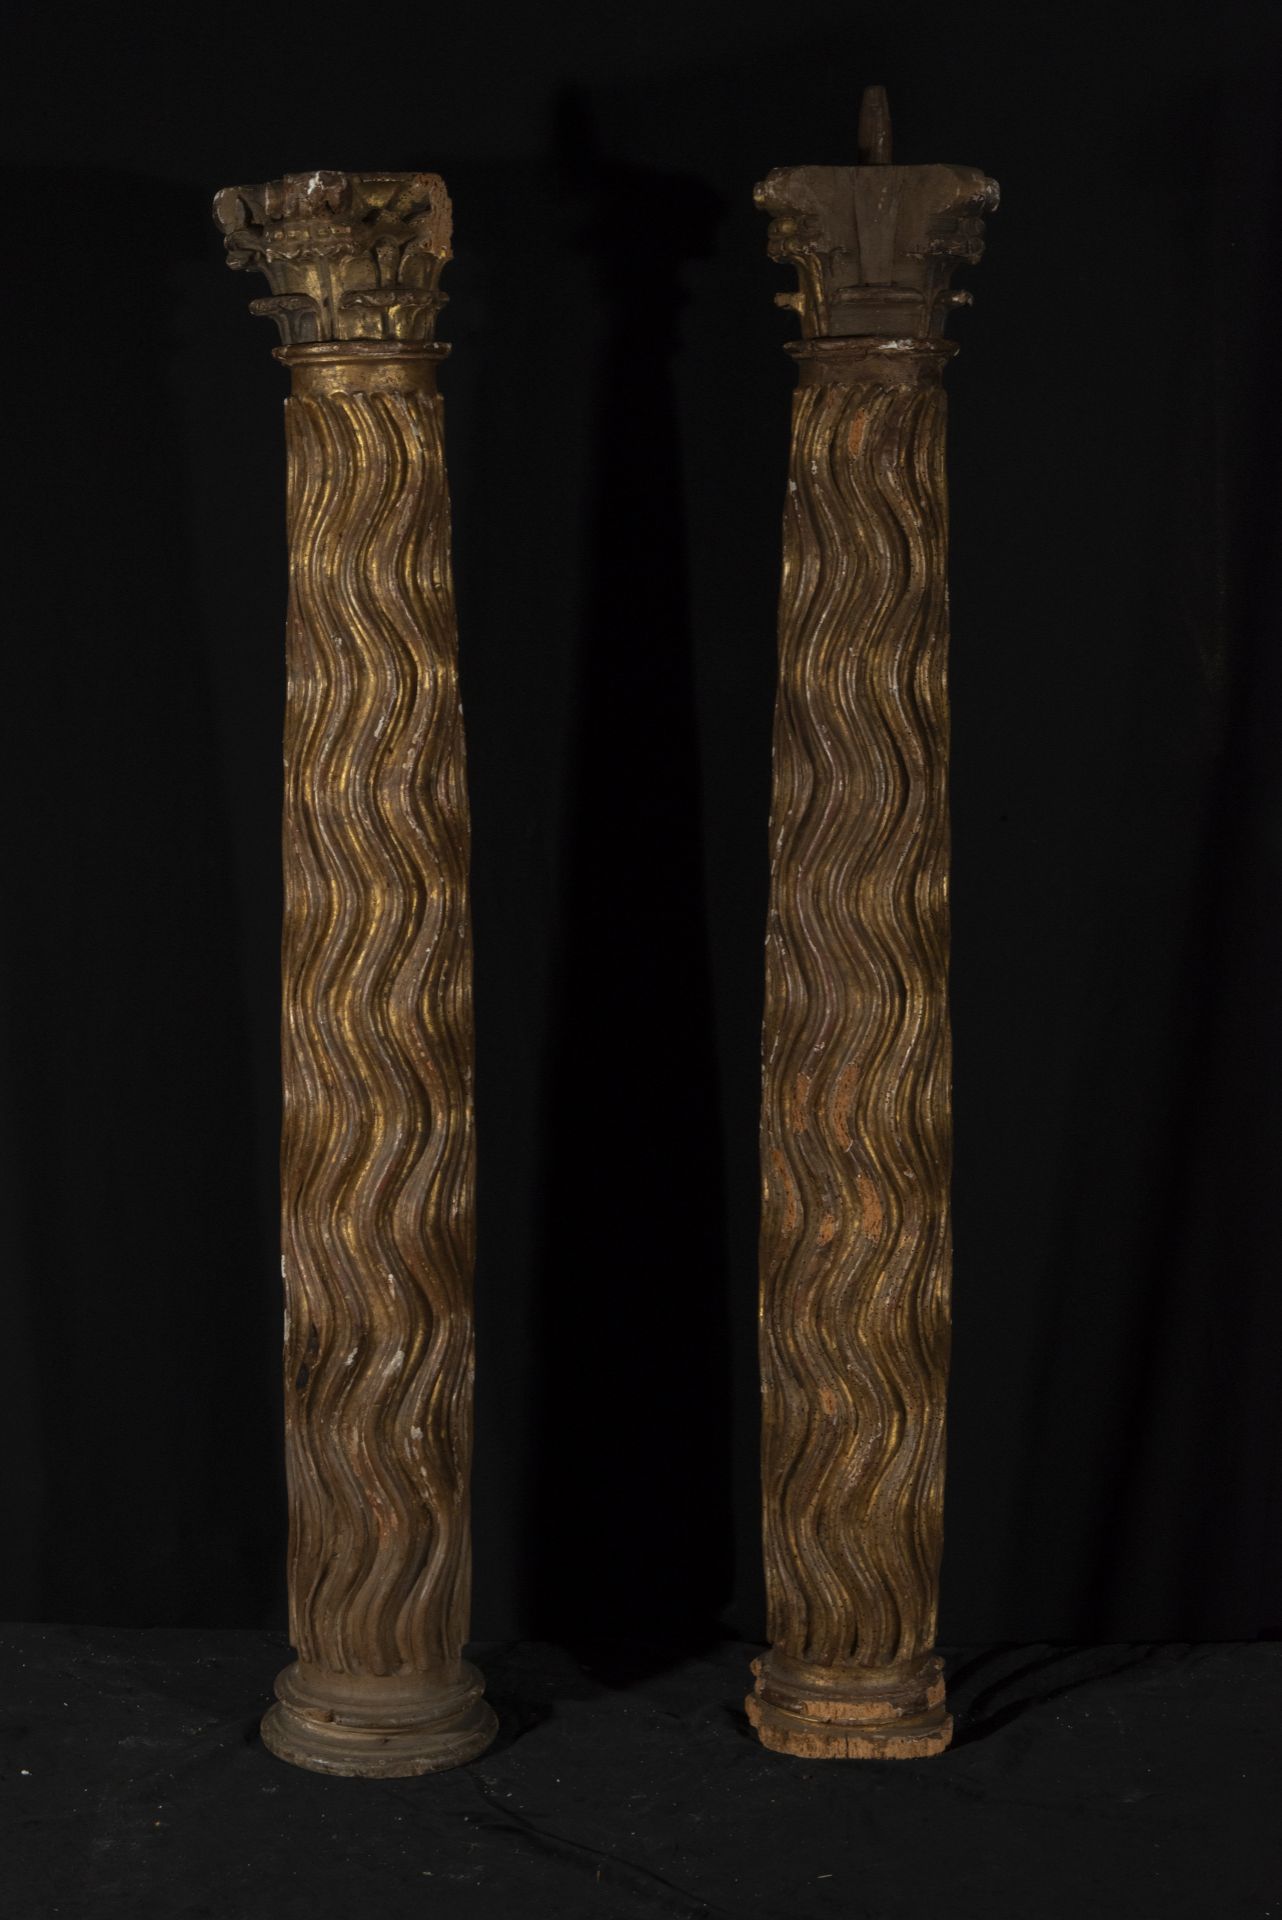 Pair of Renaissance Columns in gilded wood, 17th century